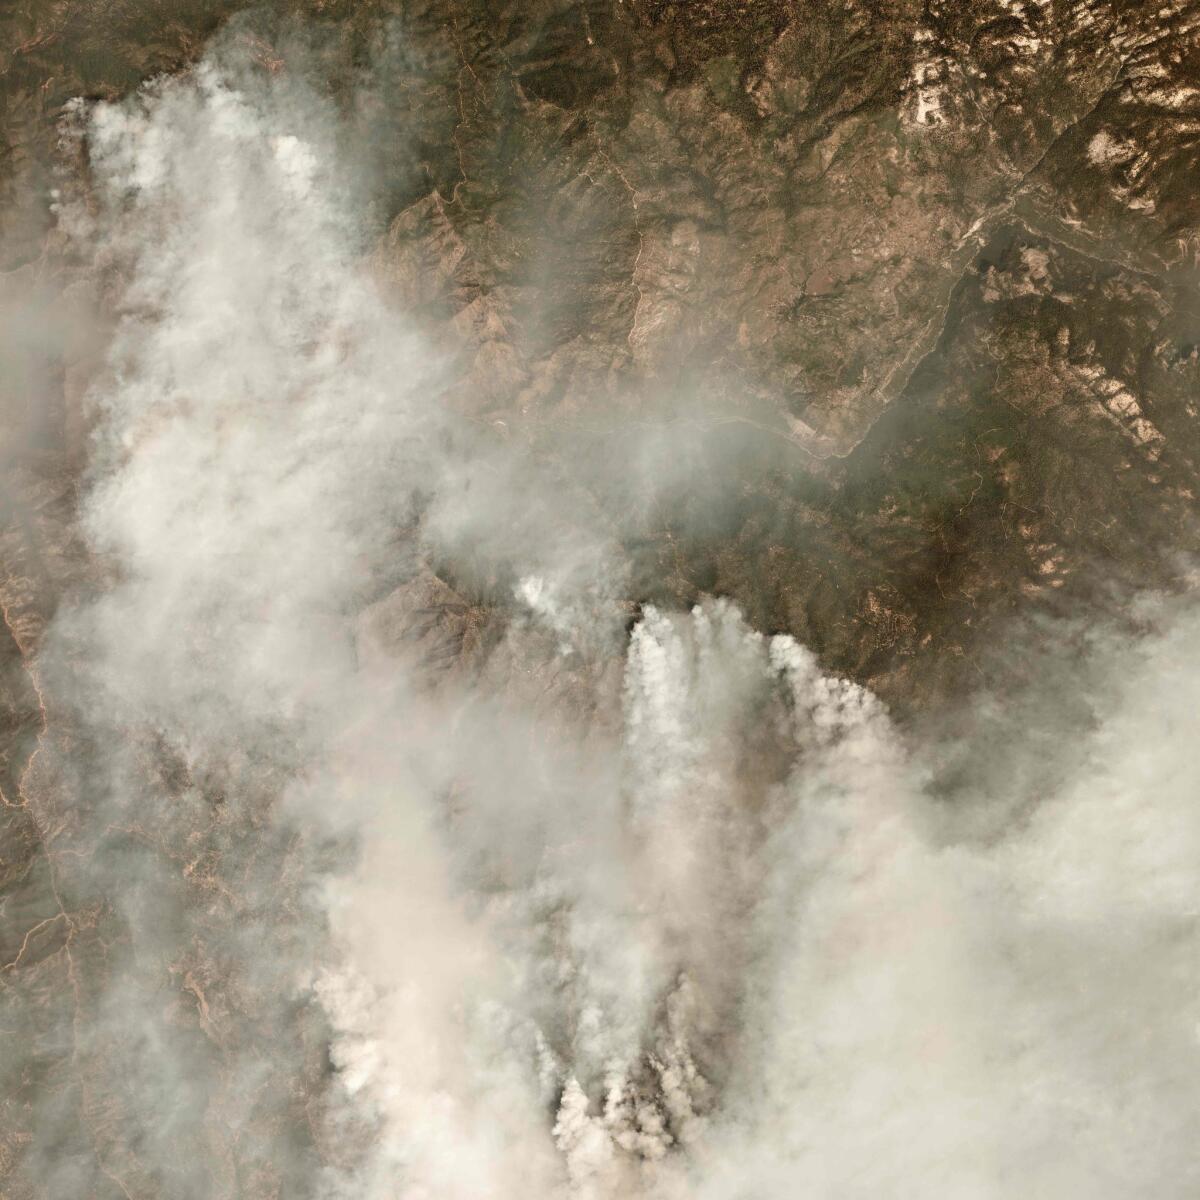 This handout satellite picture taken July 28 shows smoke rising from the Ferguson fire in California.